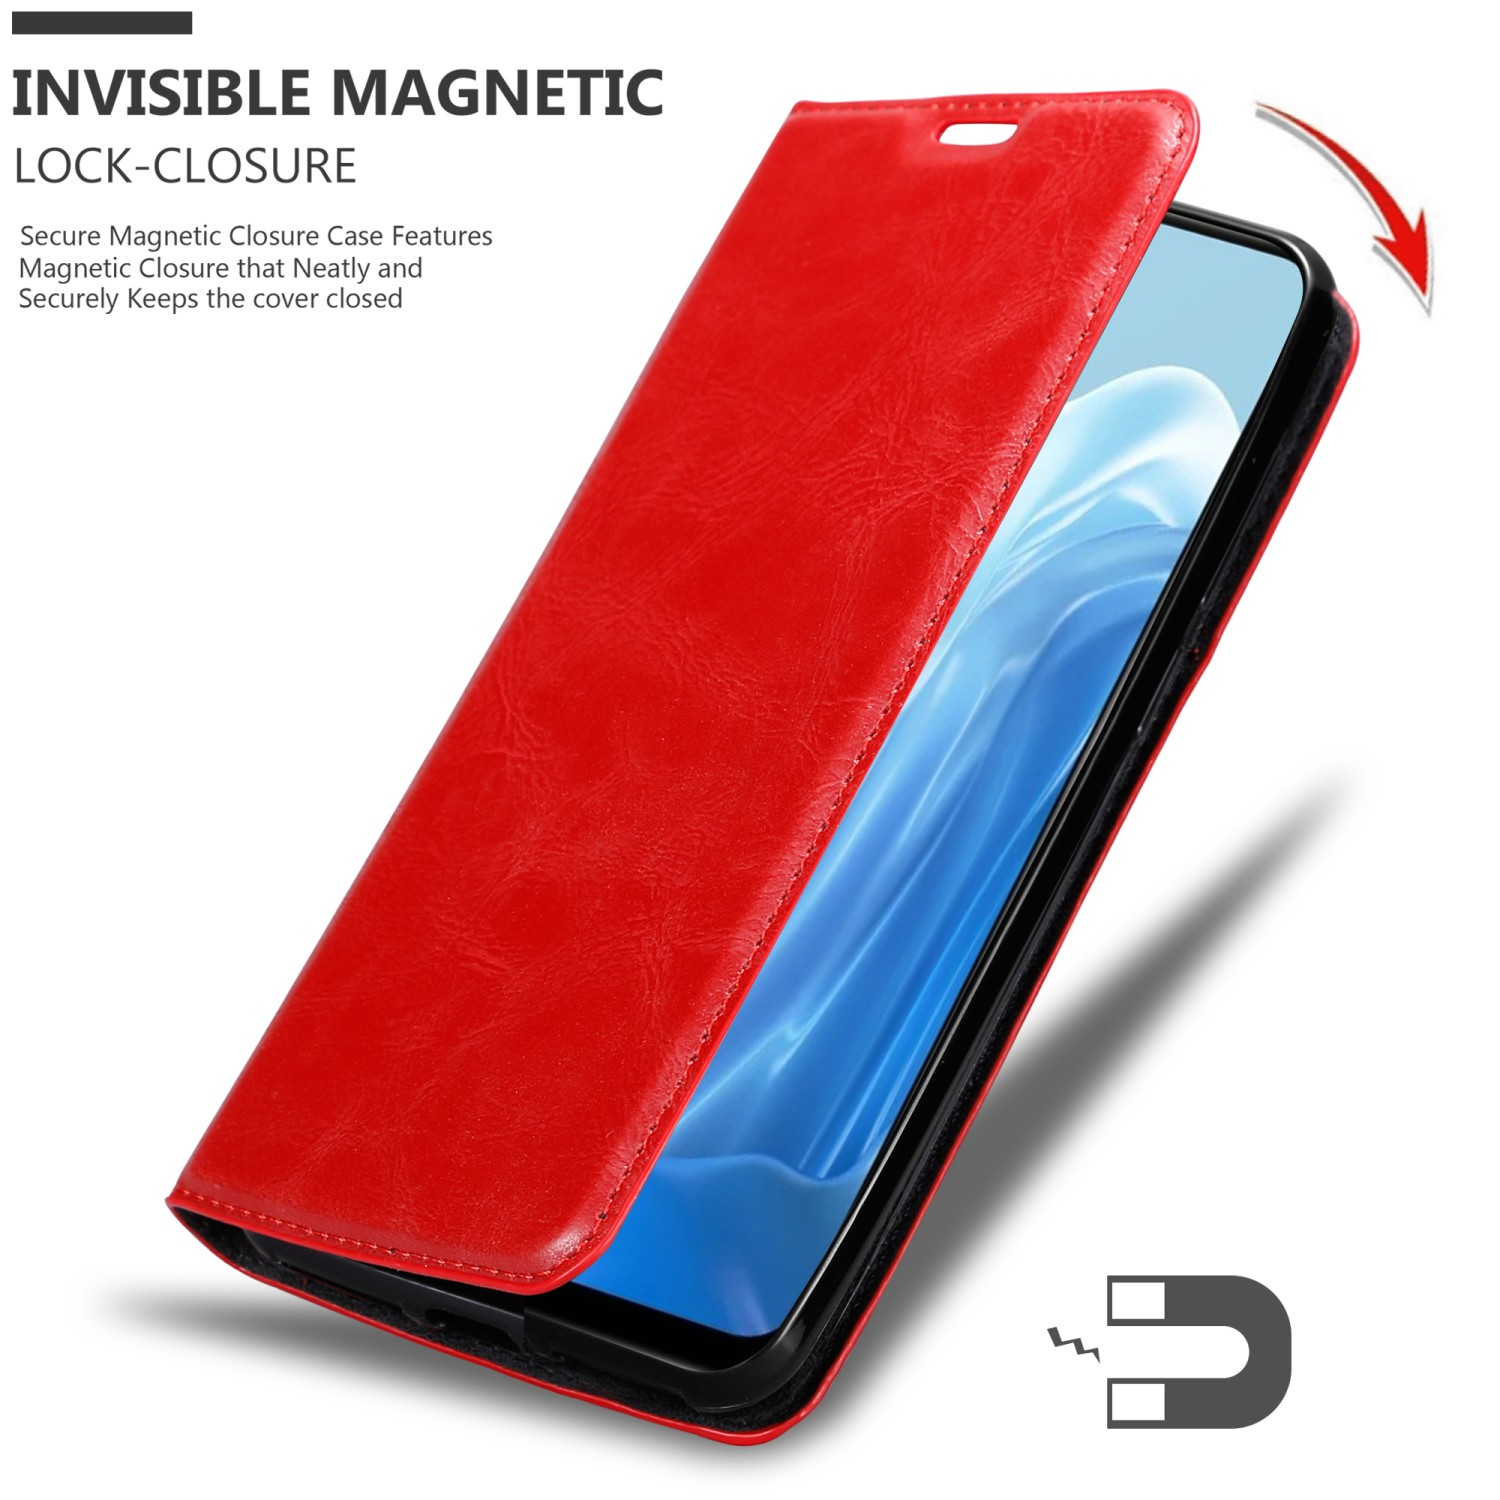 LITE CADORABO 5G, Hülle Oppo, Reno7 Book ROT Bookcover, Invisible APFEL FIND X5 Magnet, /